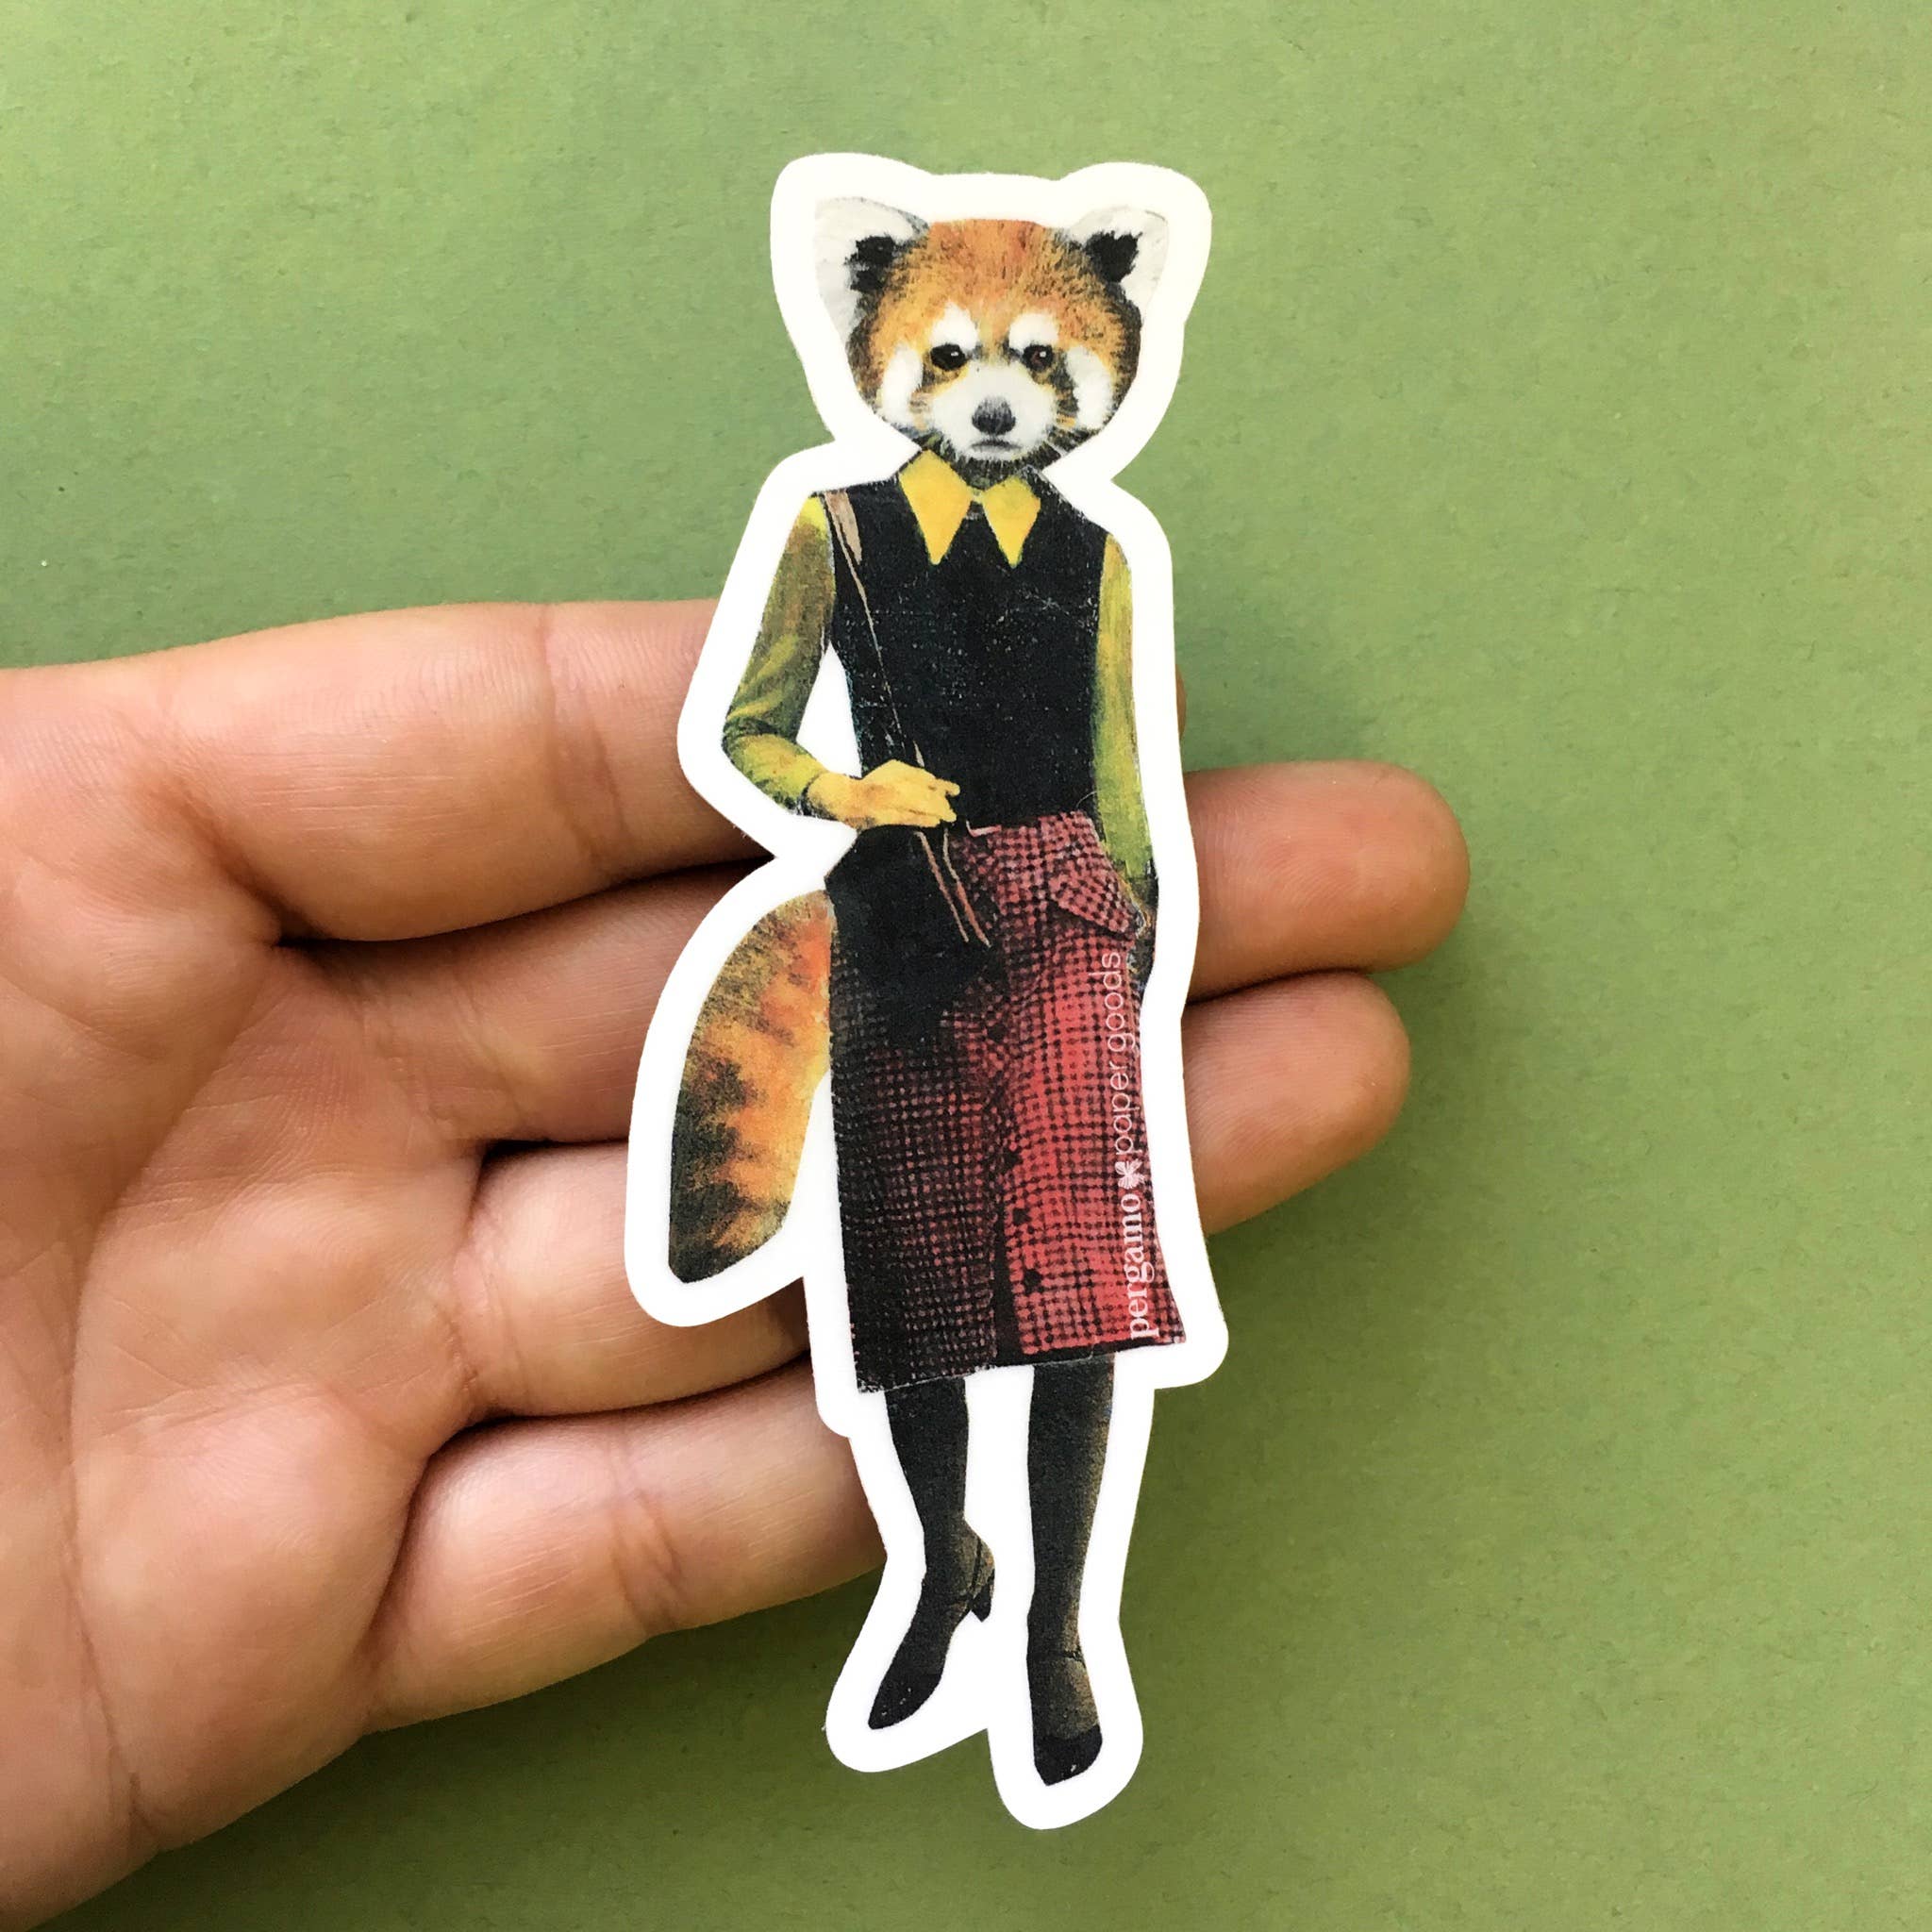 Red Panda Lady Vinyl Sticker - Out of the Blue